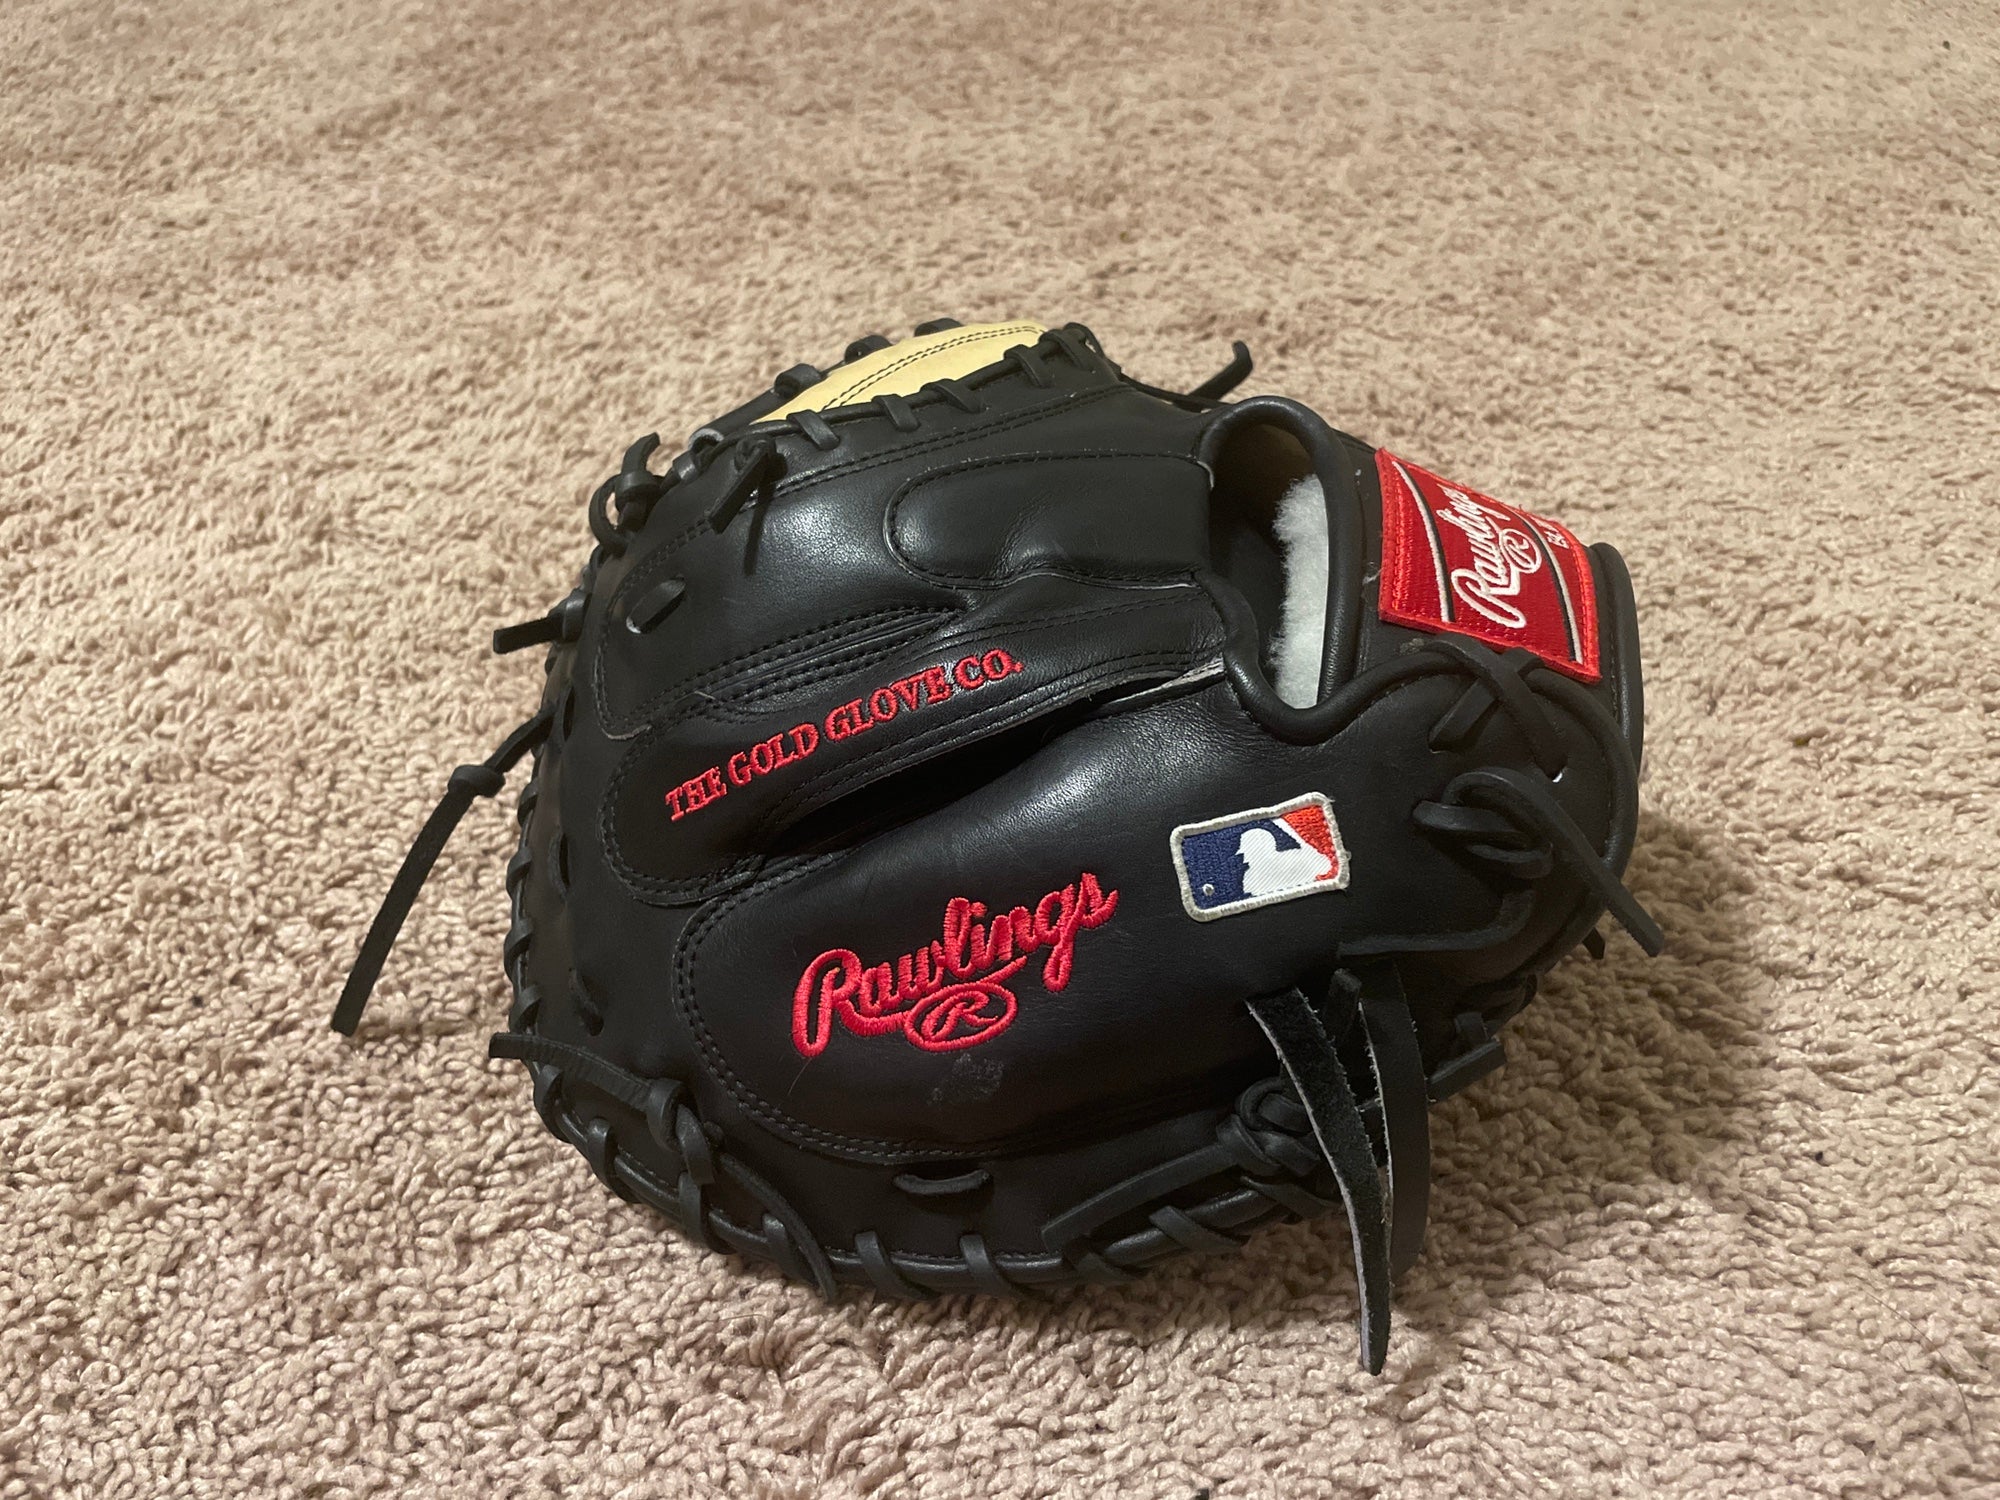 Another beautiful pickup is this Rawlings pro preferred JT Realmuto 34”  catchers mitt! What do you think of it? Its not for sale so please…